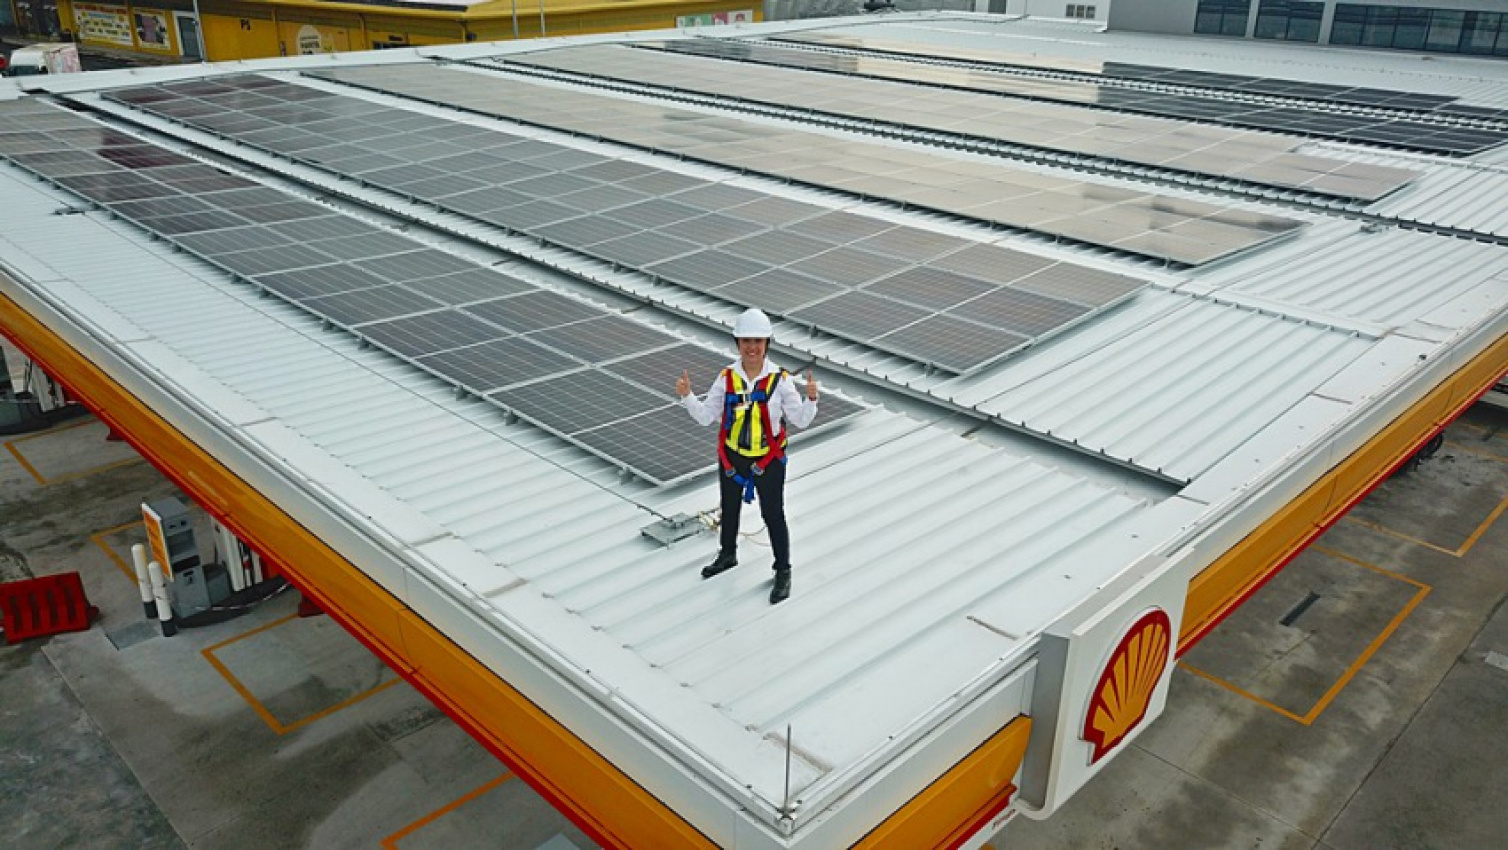 autos, cars, carbon footprint, electricity supply, green building index, shell malaysia, solar power, sustainability, sunshine powers shell stations in malaysia